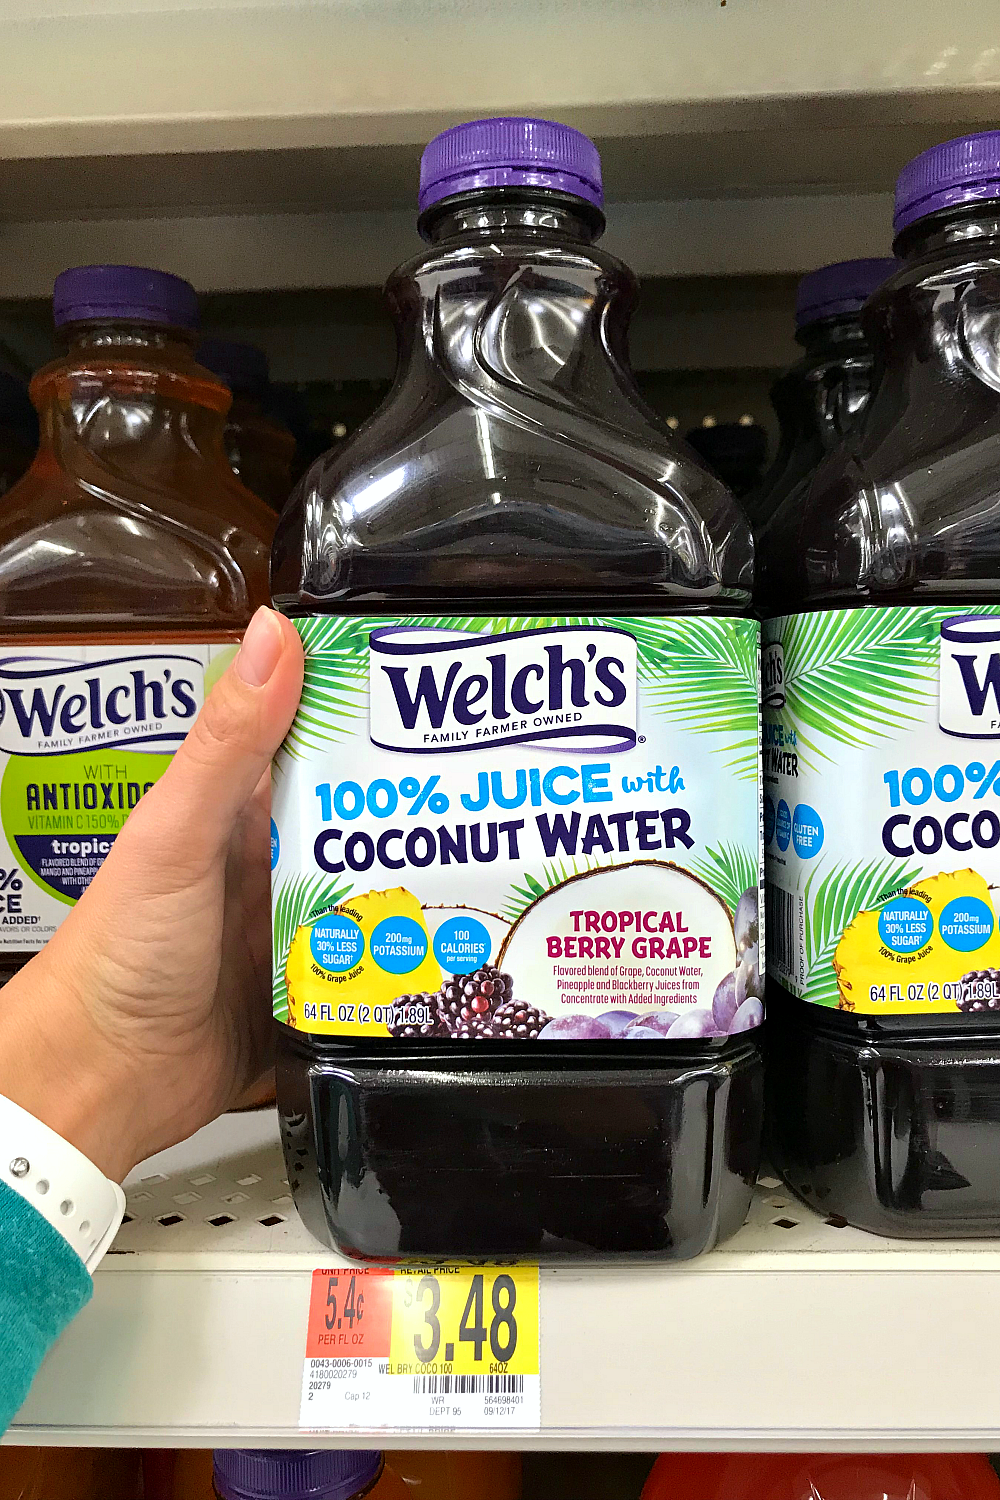 Welch's 100% Juice With Coconut Water at Walmart